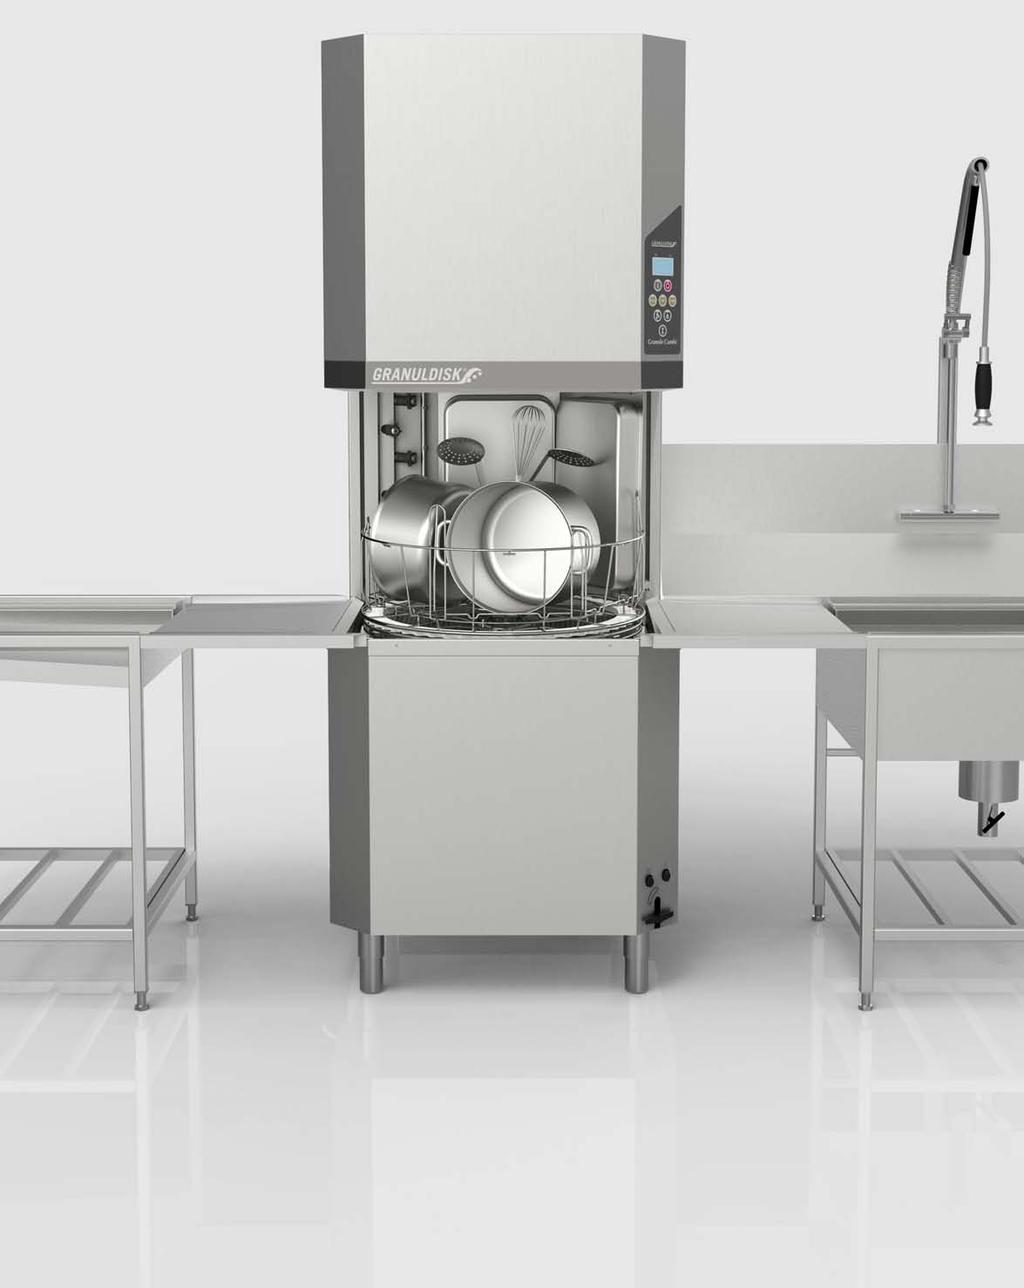 GRANULE GASTRO * tabling not supplied by GRANULDISK Granule Gastro is a through-feed Granule potwashing machine providing an efficient, flexible workflow in the kitchen.